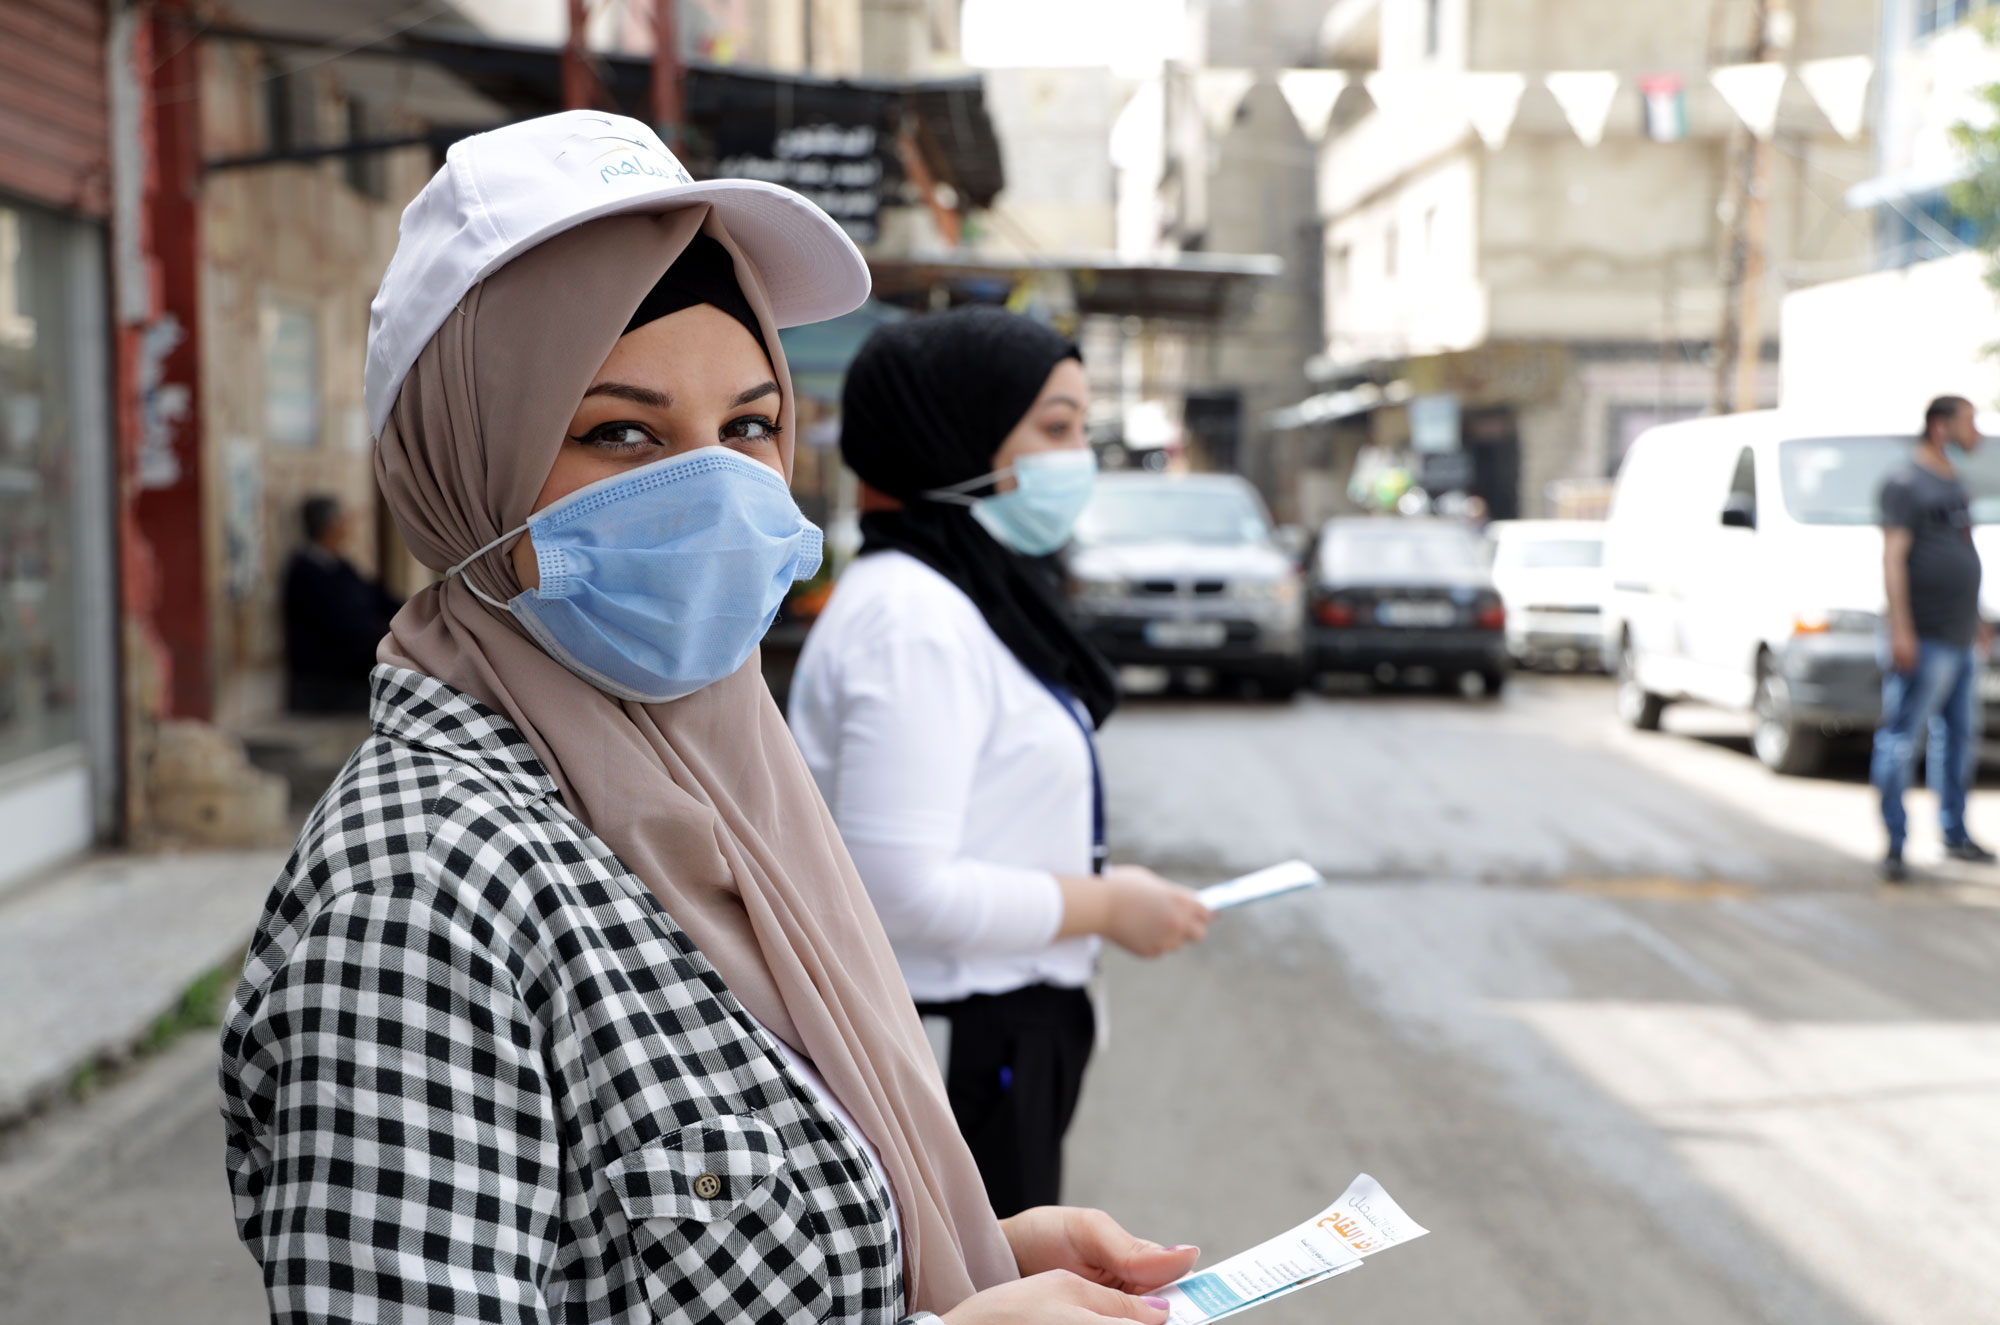 Anera volunteers distributing information during the vaccination campaign.